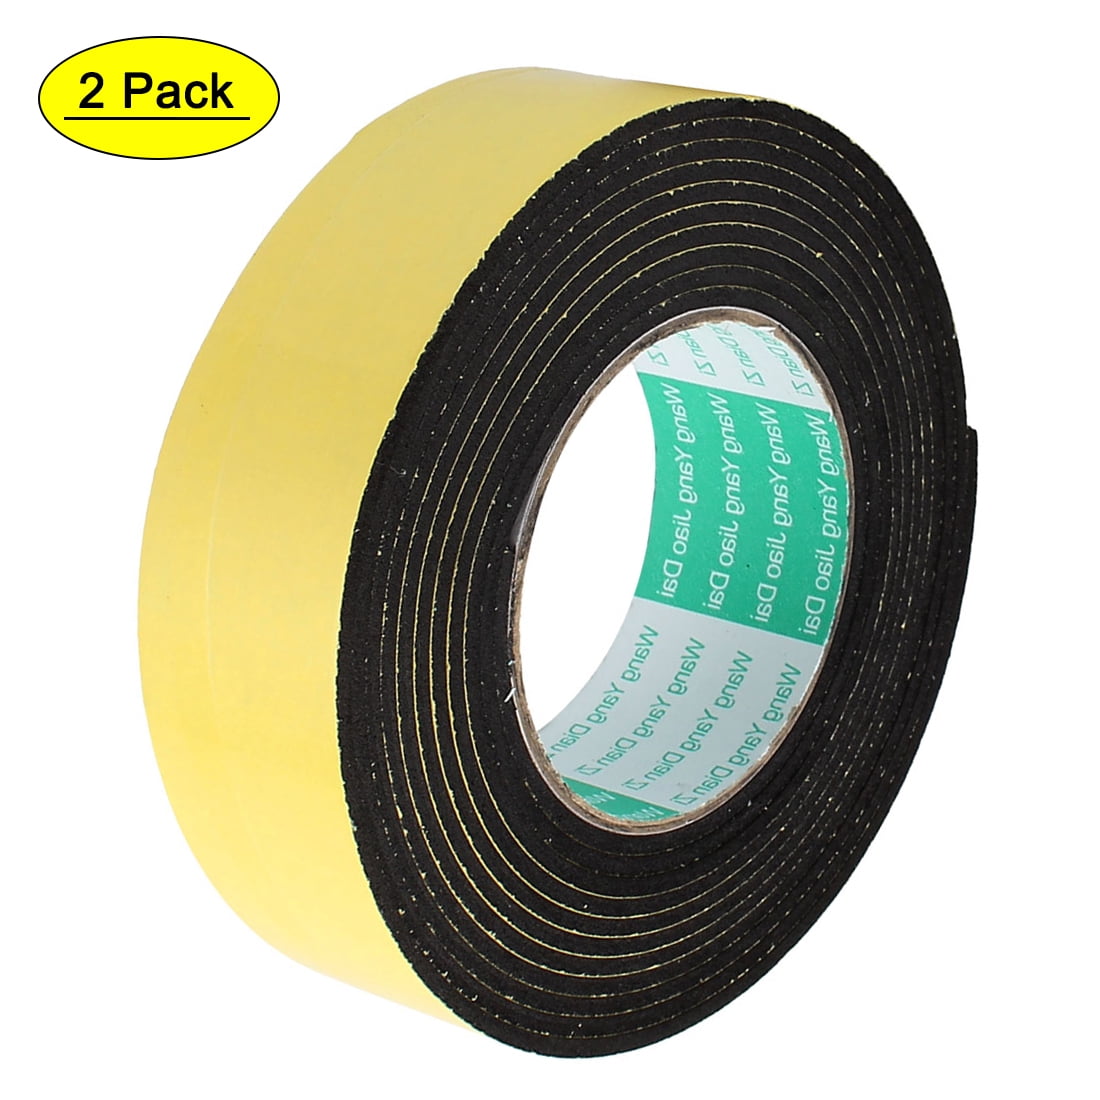 Free Postage BRAND NEW 10m Roll Foam Tape for Sealing Insulation 